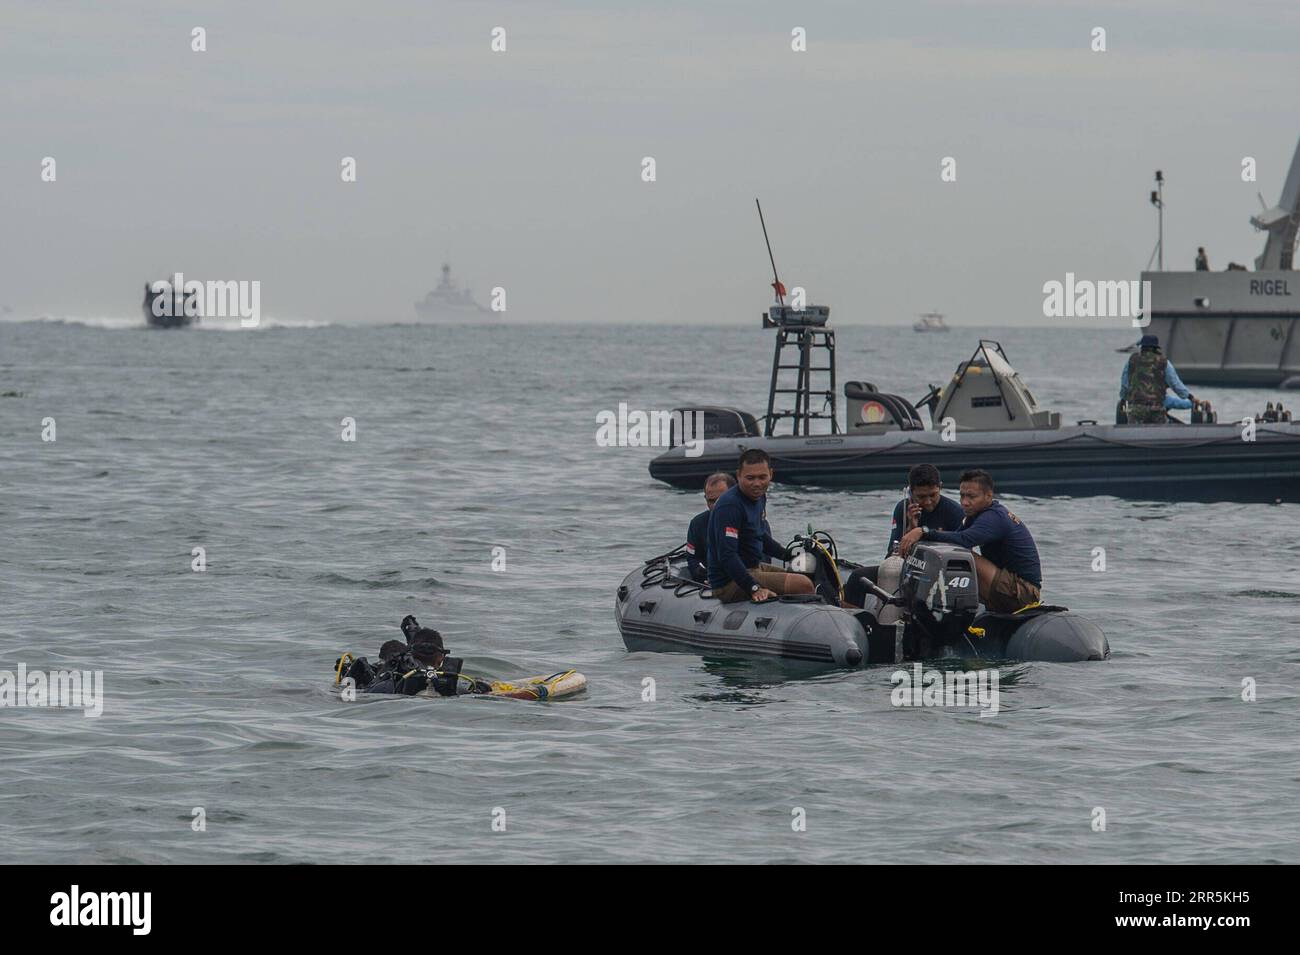 210110 -- LANCANG ISLAND, Jan. 10, 2021 -- Navy special force conducts a search operation at the plane crash site of the Sriwijaya Air flight SJ-182 in the waters of Lancang Island, north of Jakarta, Indonesia, Jan. 10, 2021. Indonesian authorities said on Sunday that they have found body parts and stuffs suspected to belong to passengers of Indonesia s Sriwijaya Air plane that crashed into waters off Jakarta. Ships and aircraft from various Indonesian agencies have been involved in the search for the Boeing 737-500 plane which crashed shortly after takeoff with 62 people aboard on Saturday. Stock Photo